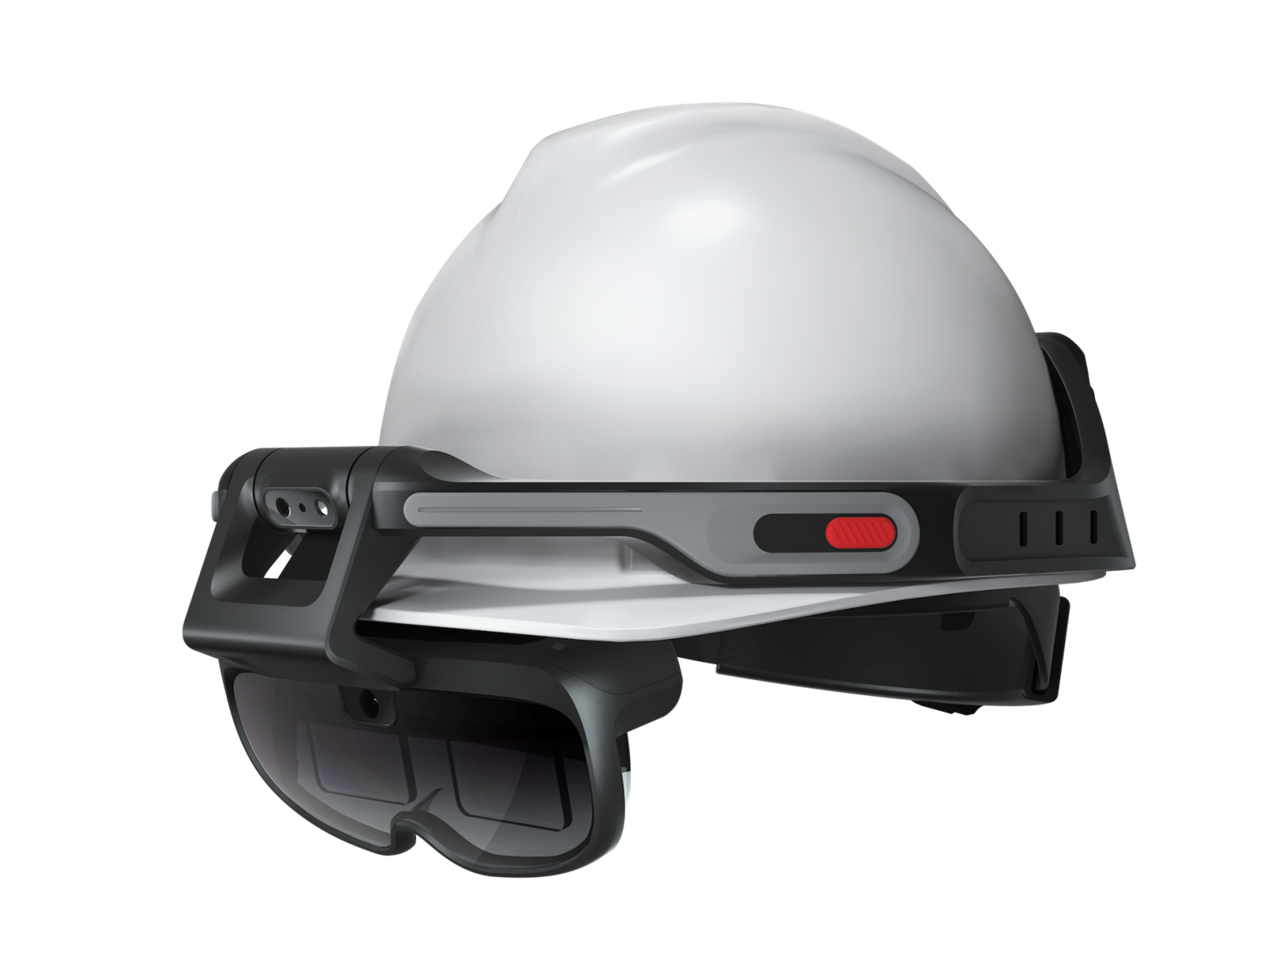 Rokid Pressemitteilungen und Stories X-Craft is the world’s first explosion-proof AR headset equipped with ATEX Zone 1/21 certification from TÜV SÜD GROUP